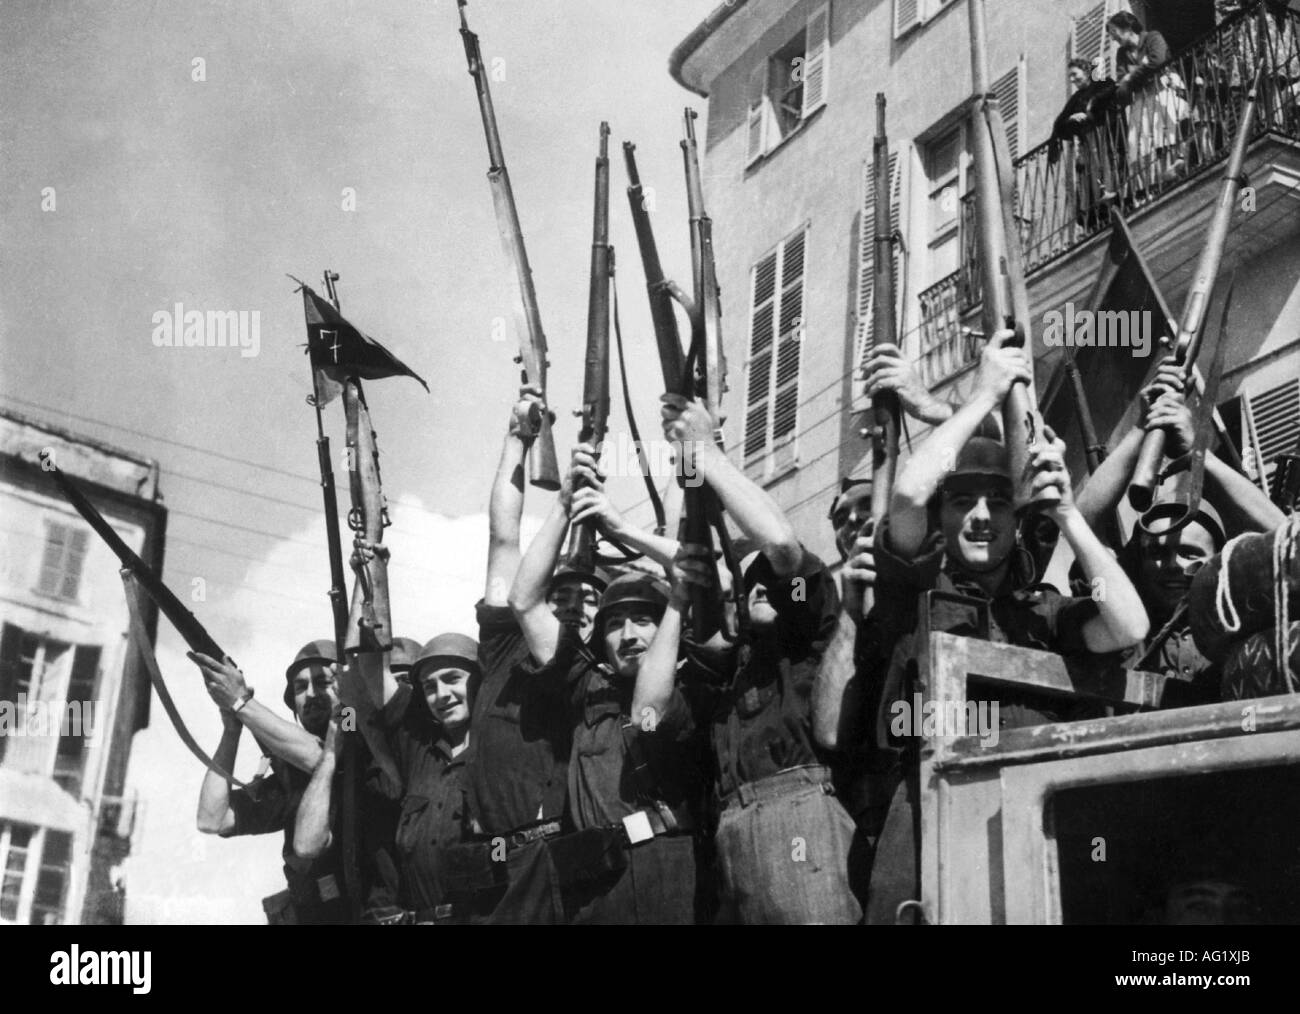 geography / travel, Spain, Spanish Civil War, 1936 - 1939, jubilating Falange members on a truck, Leon, 7.12.1936, weapons, arms, rifles, cheering, militia, Falange Espanola, Phalange, soldiers, nationalist, nationalists, historic, historical, Europe, fascists, male, man, men, people, 1930s, 20th century, Stock Photo